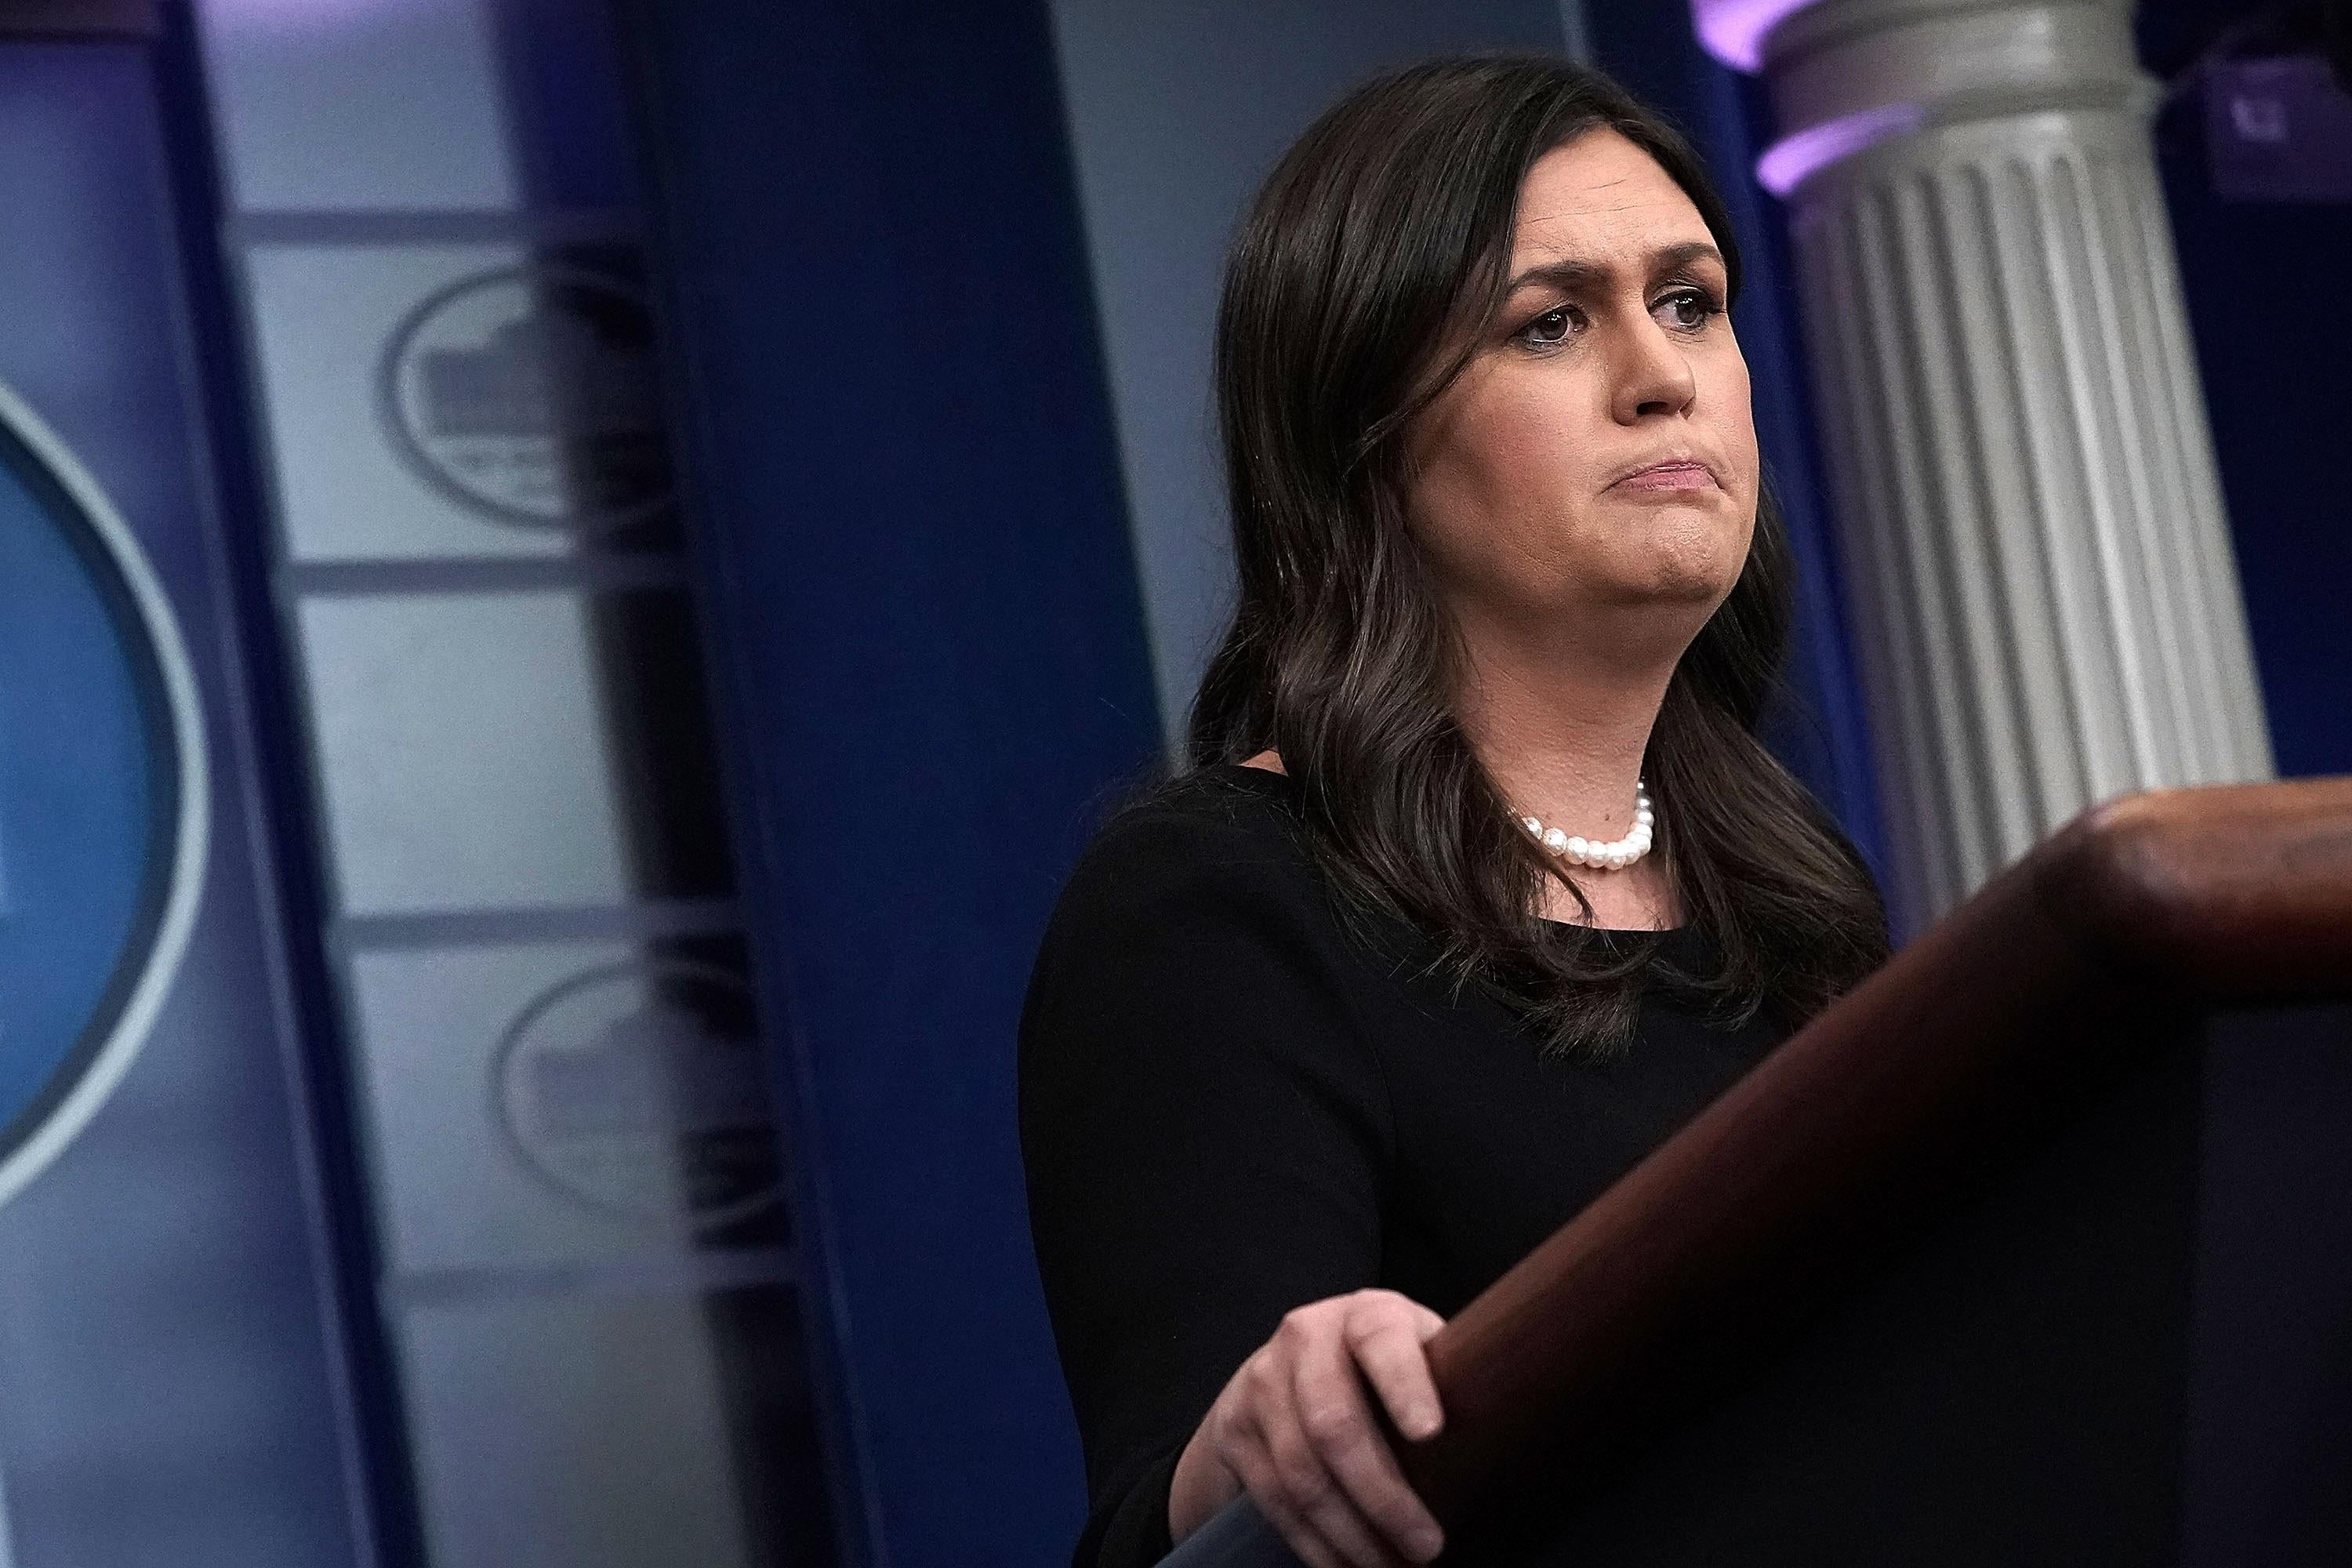 White House Press Secretary Sarah Huckabee Sanders conducts a White House daily news briefing at the James Brady Press Briefing Room of the White House June 14, 2018 in Washington, D.C.